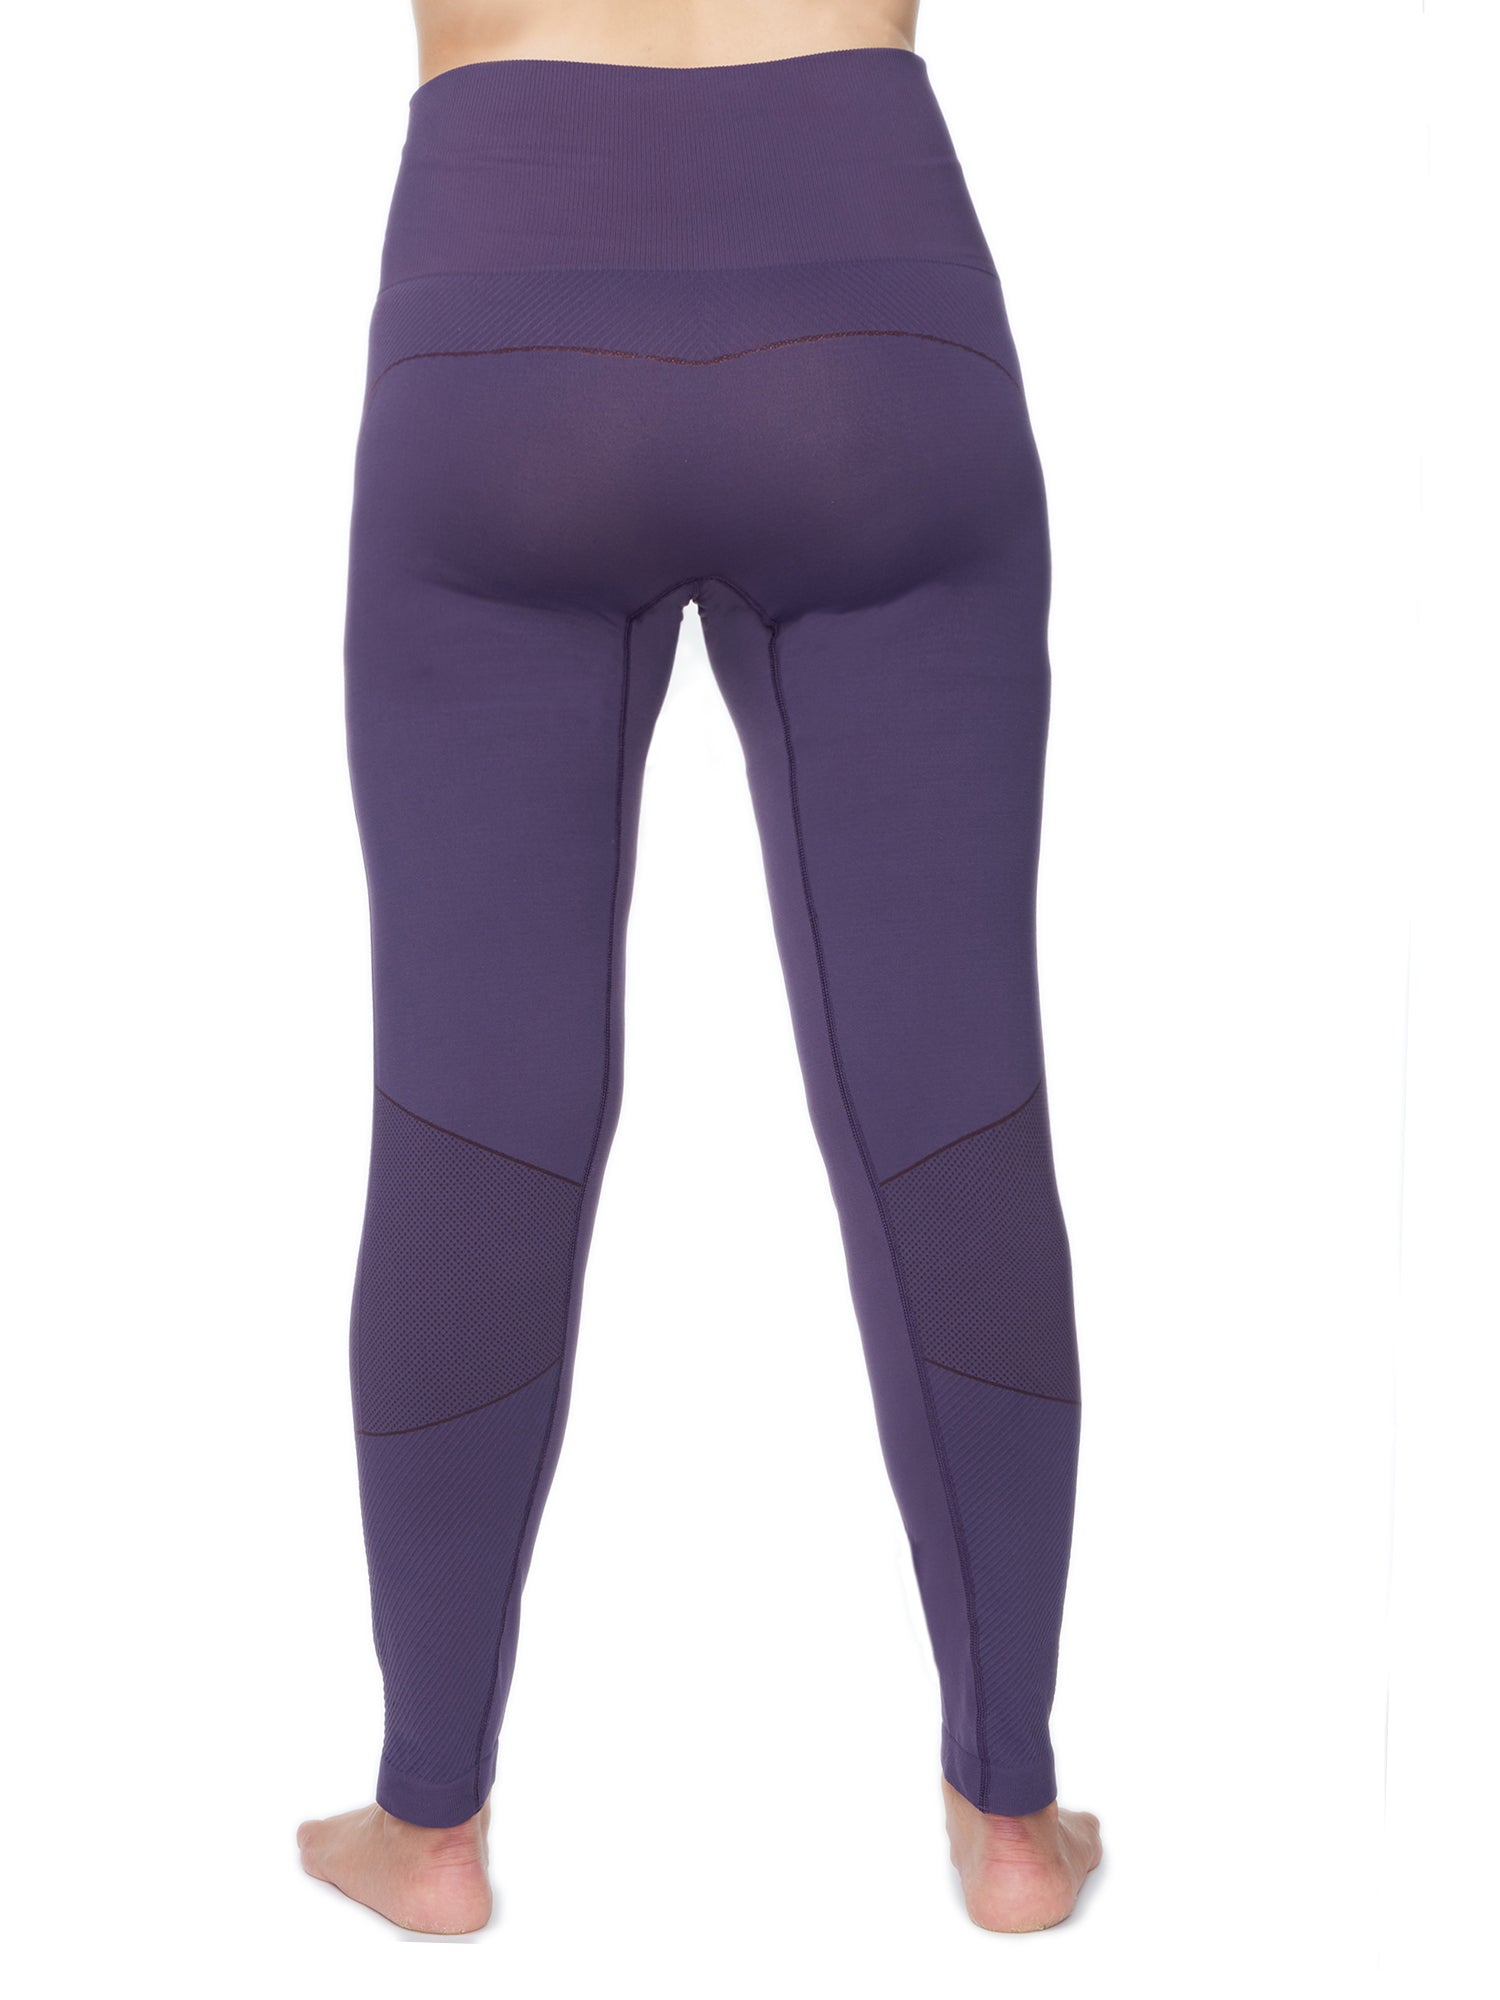 Women's Plus Active Seamless High Impact Fitness Legging with Stretch Compression in Purple